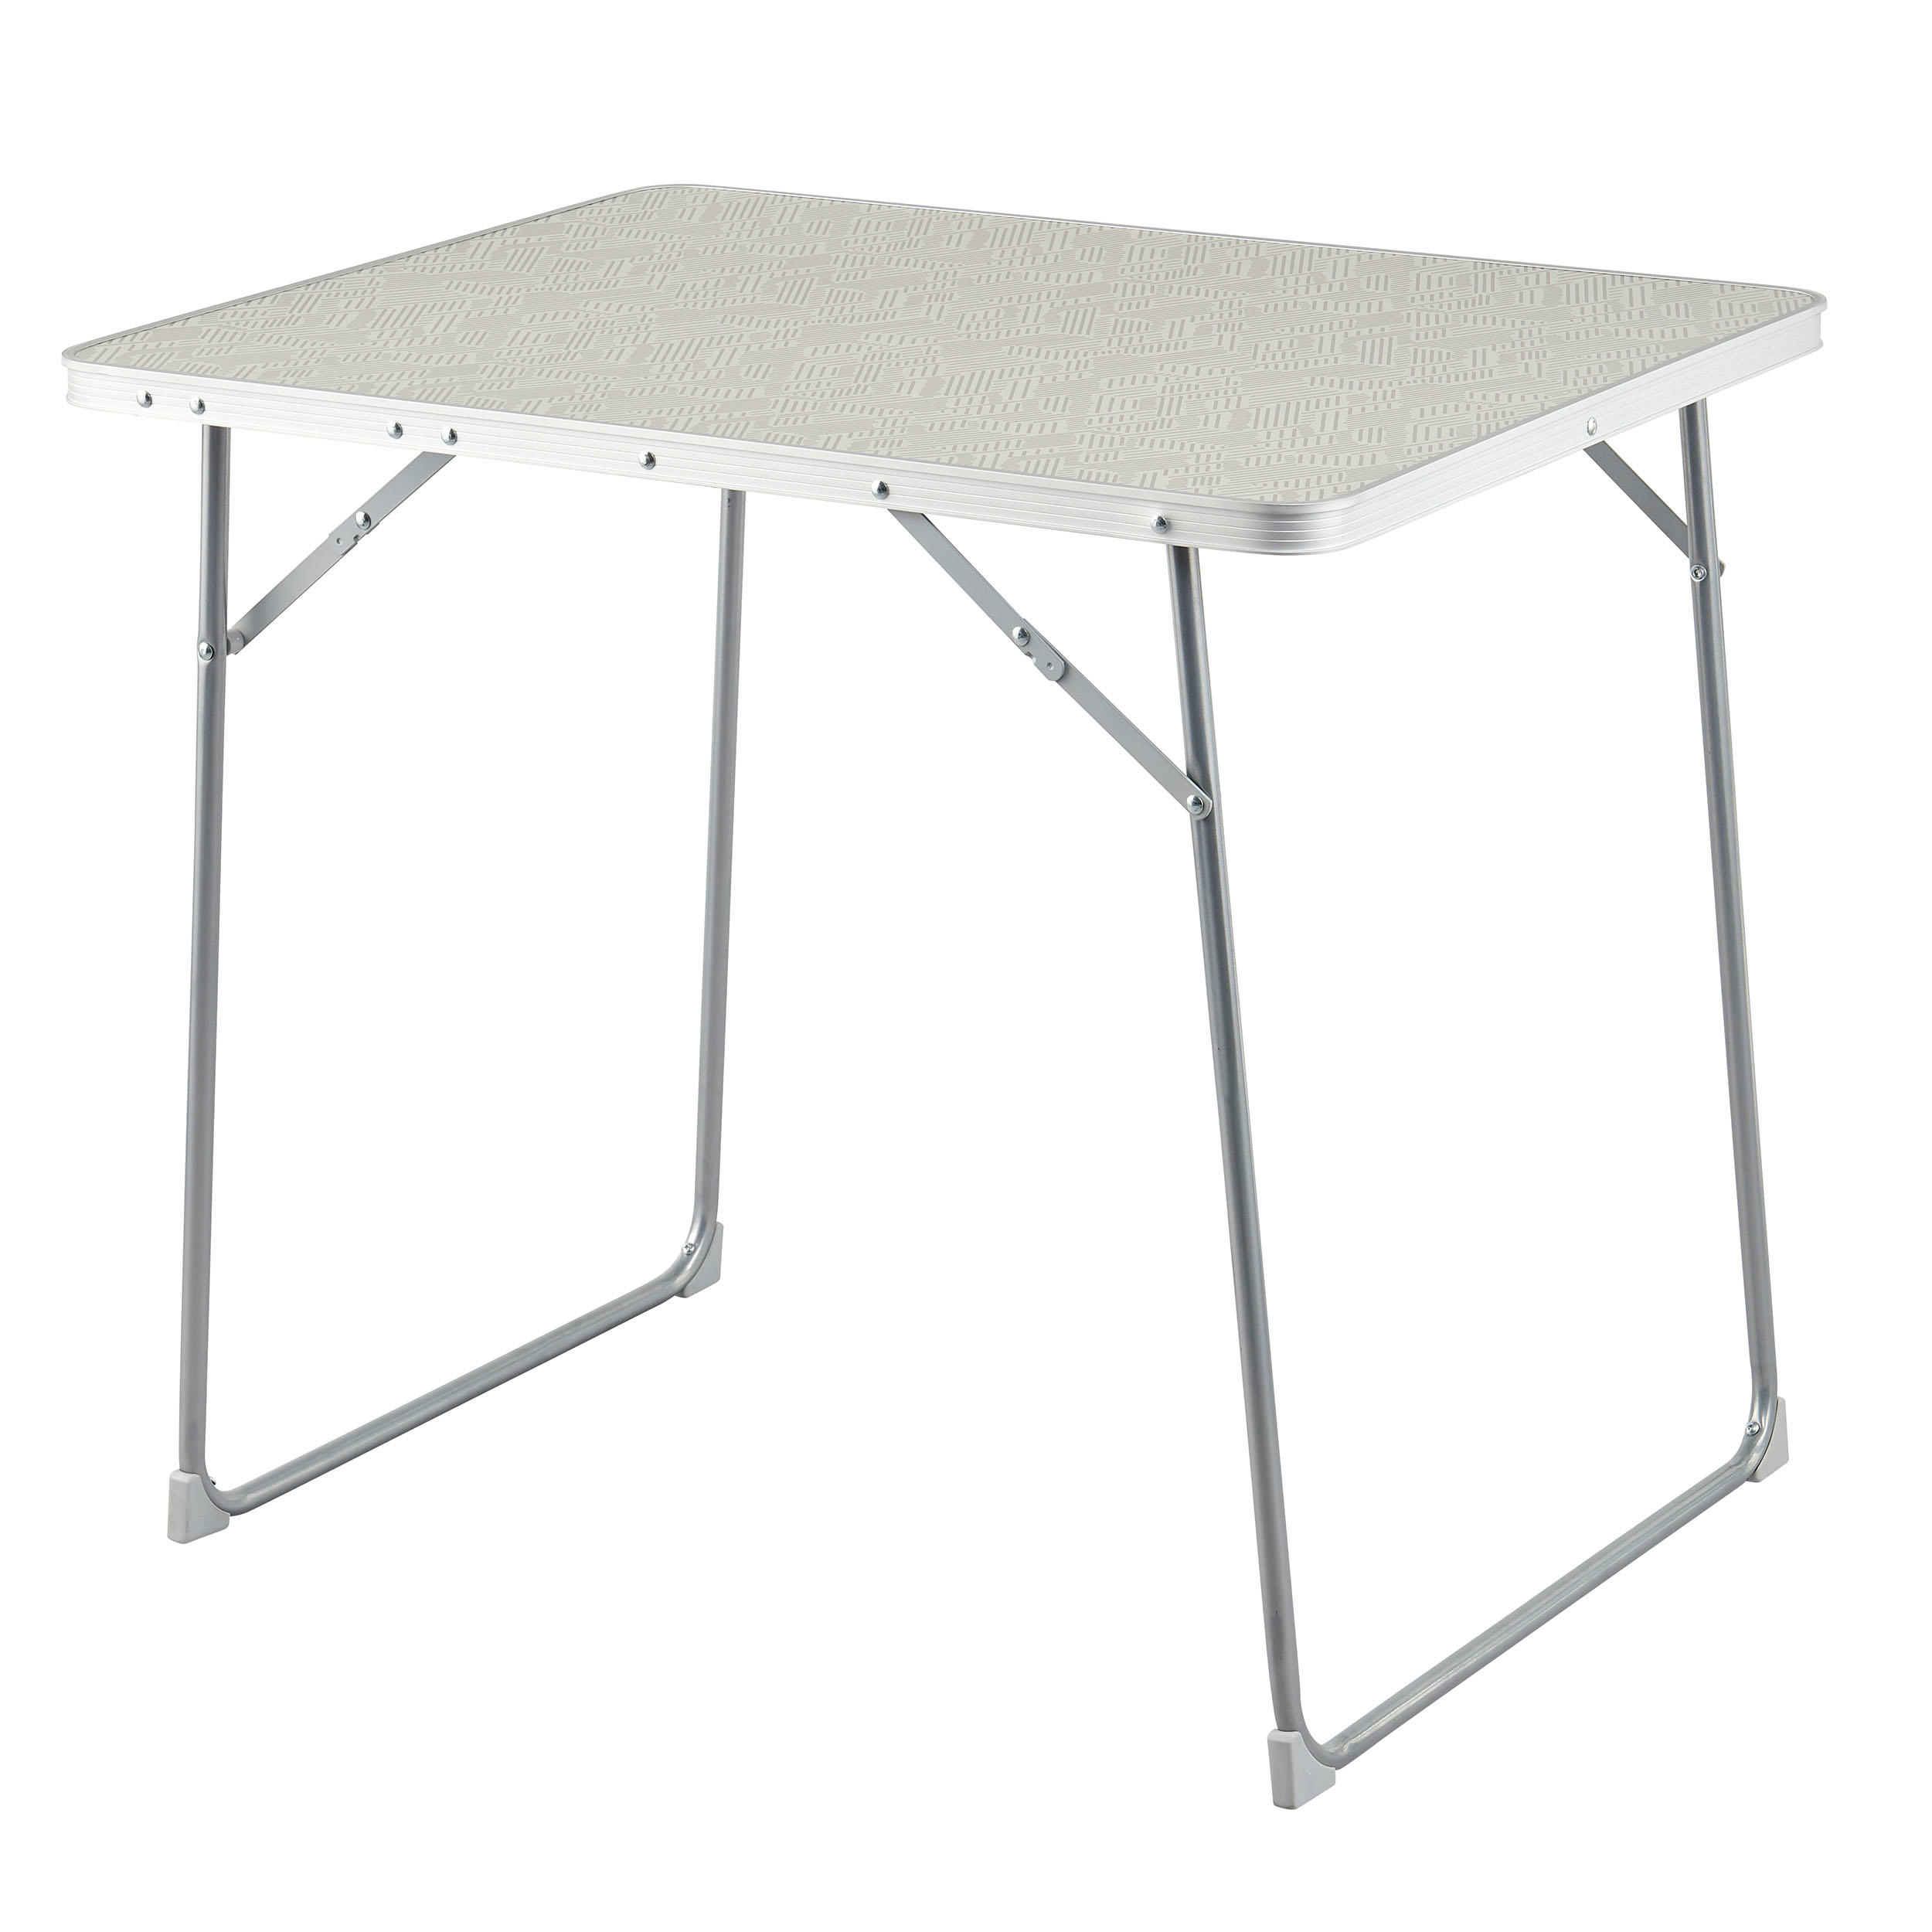 Image of 2-4 Person Camping Folding Table